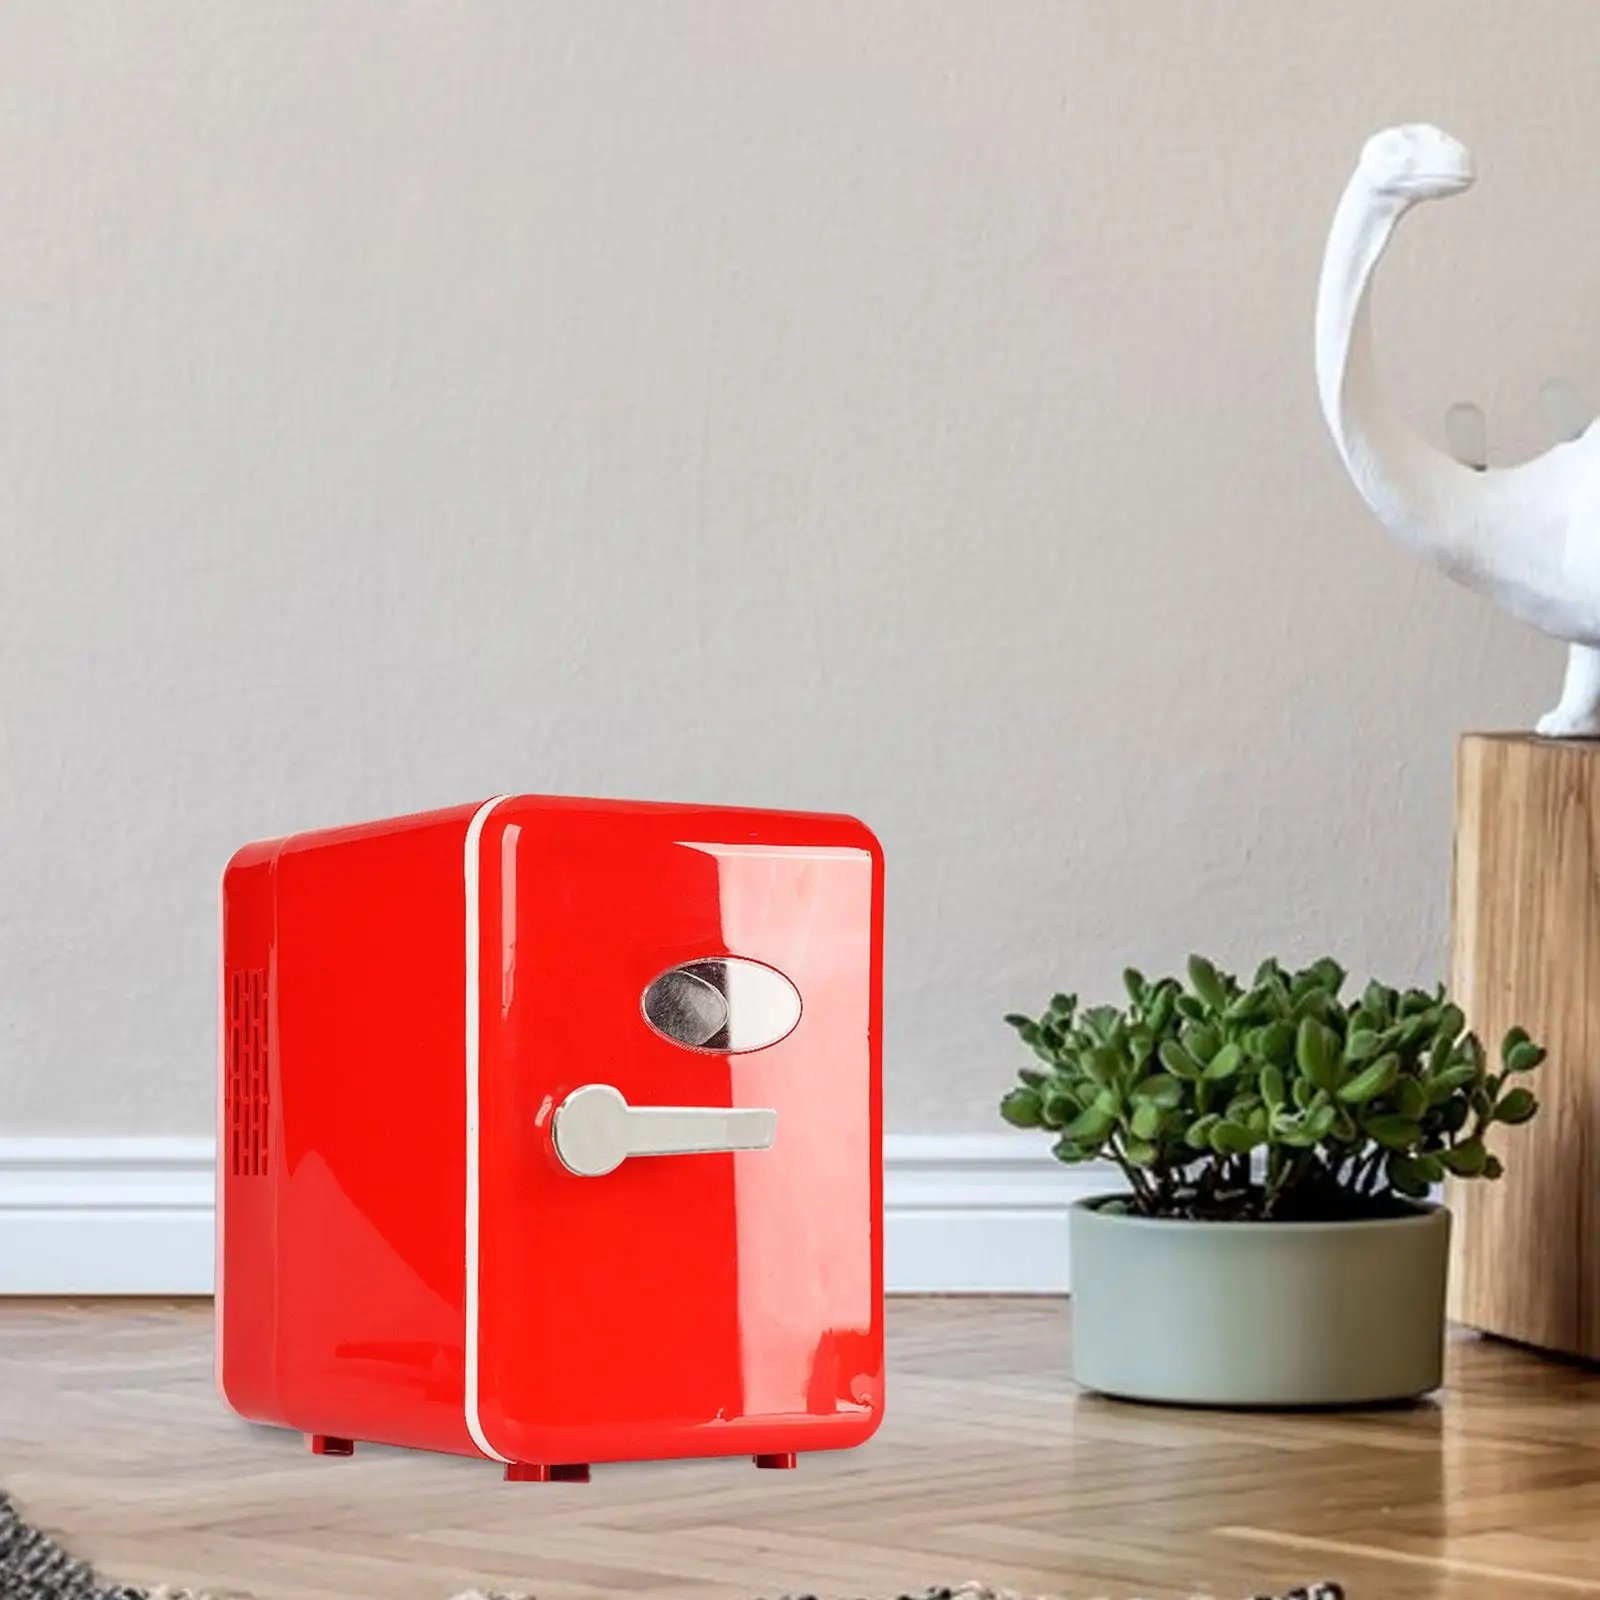 

6L Skincare Mini Fridge Portable Refrigerator UK 220V Plug 9.5x9x6.7inch Lightweight Red for Storing Small Food Items and Drinks